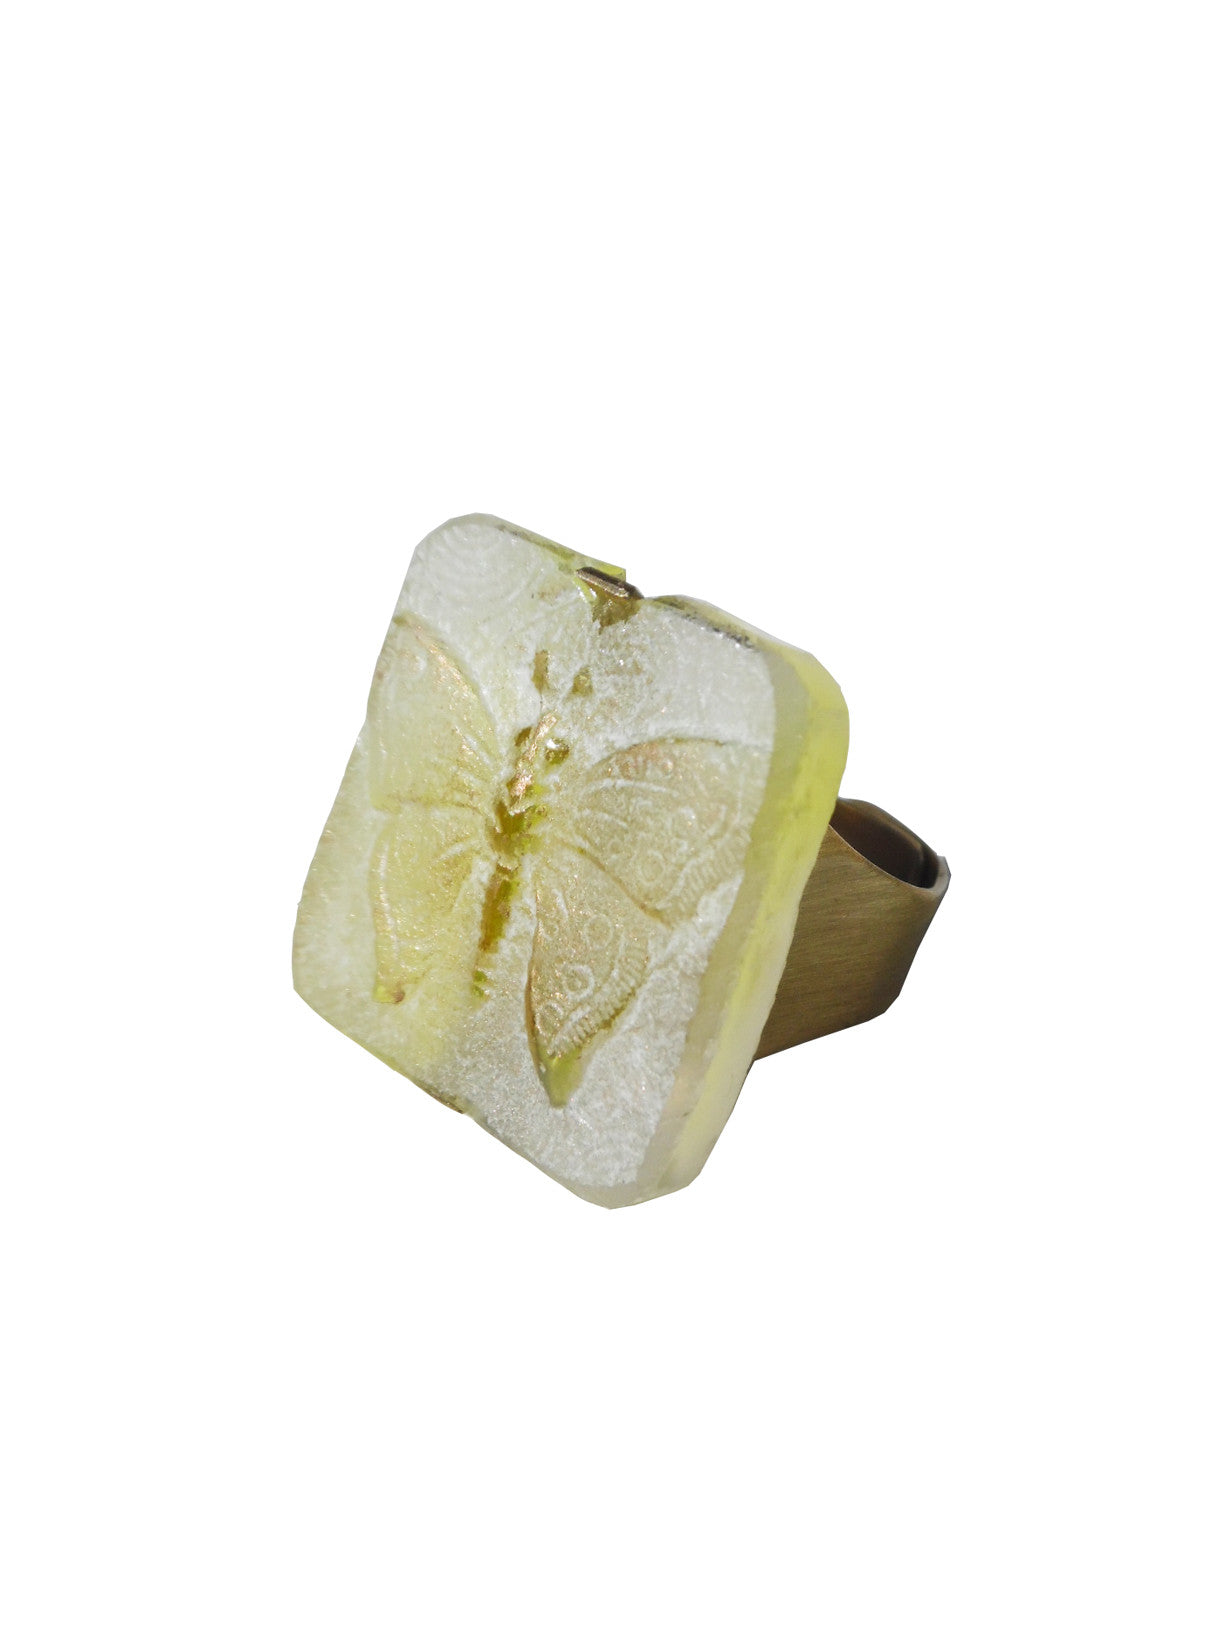 Ring Hand Cast French Glass Yellow Butterfly